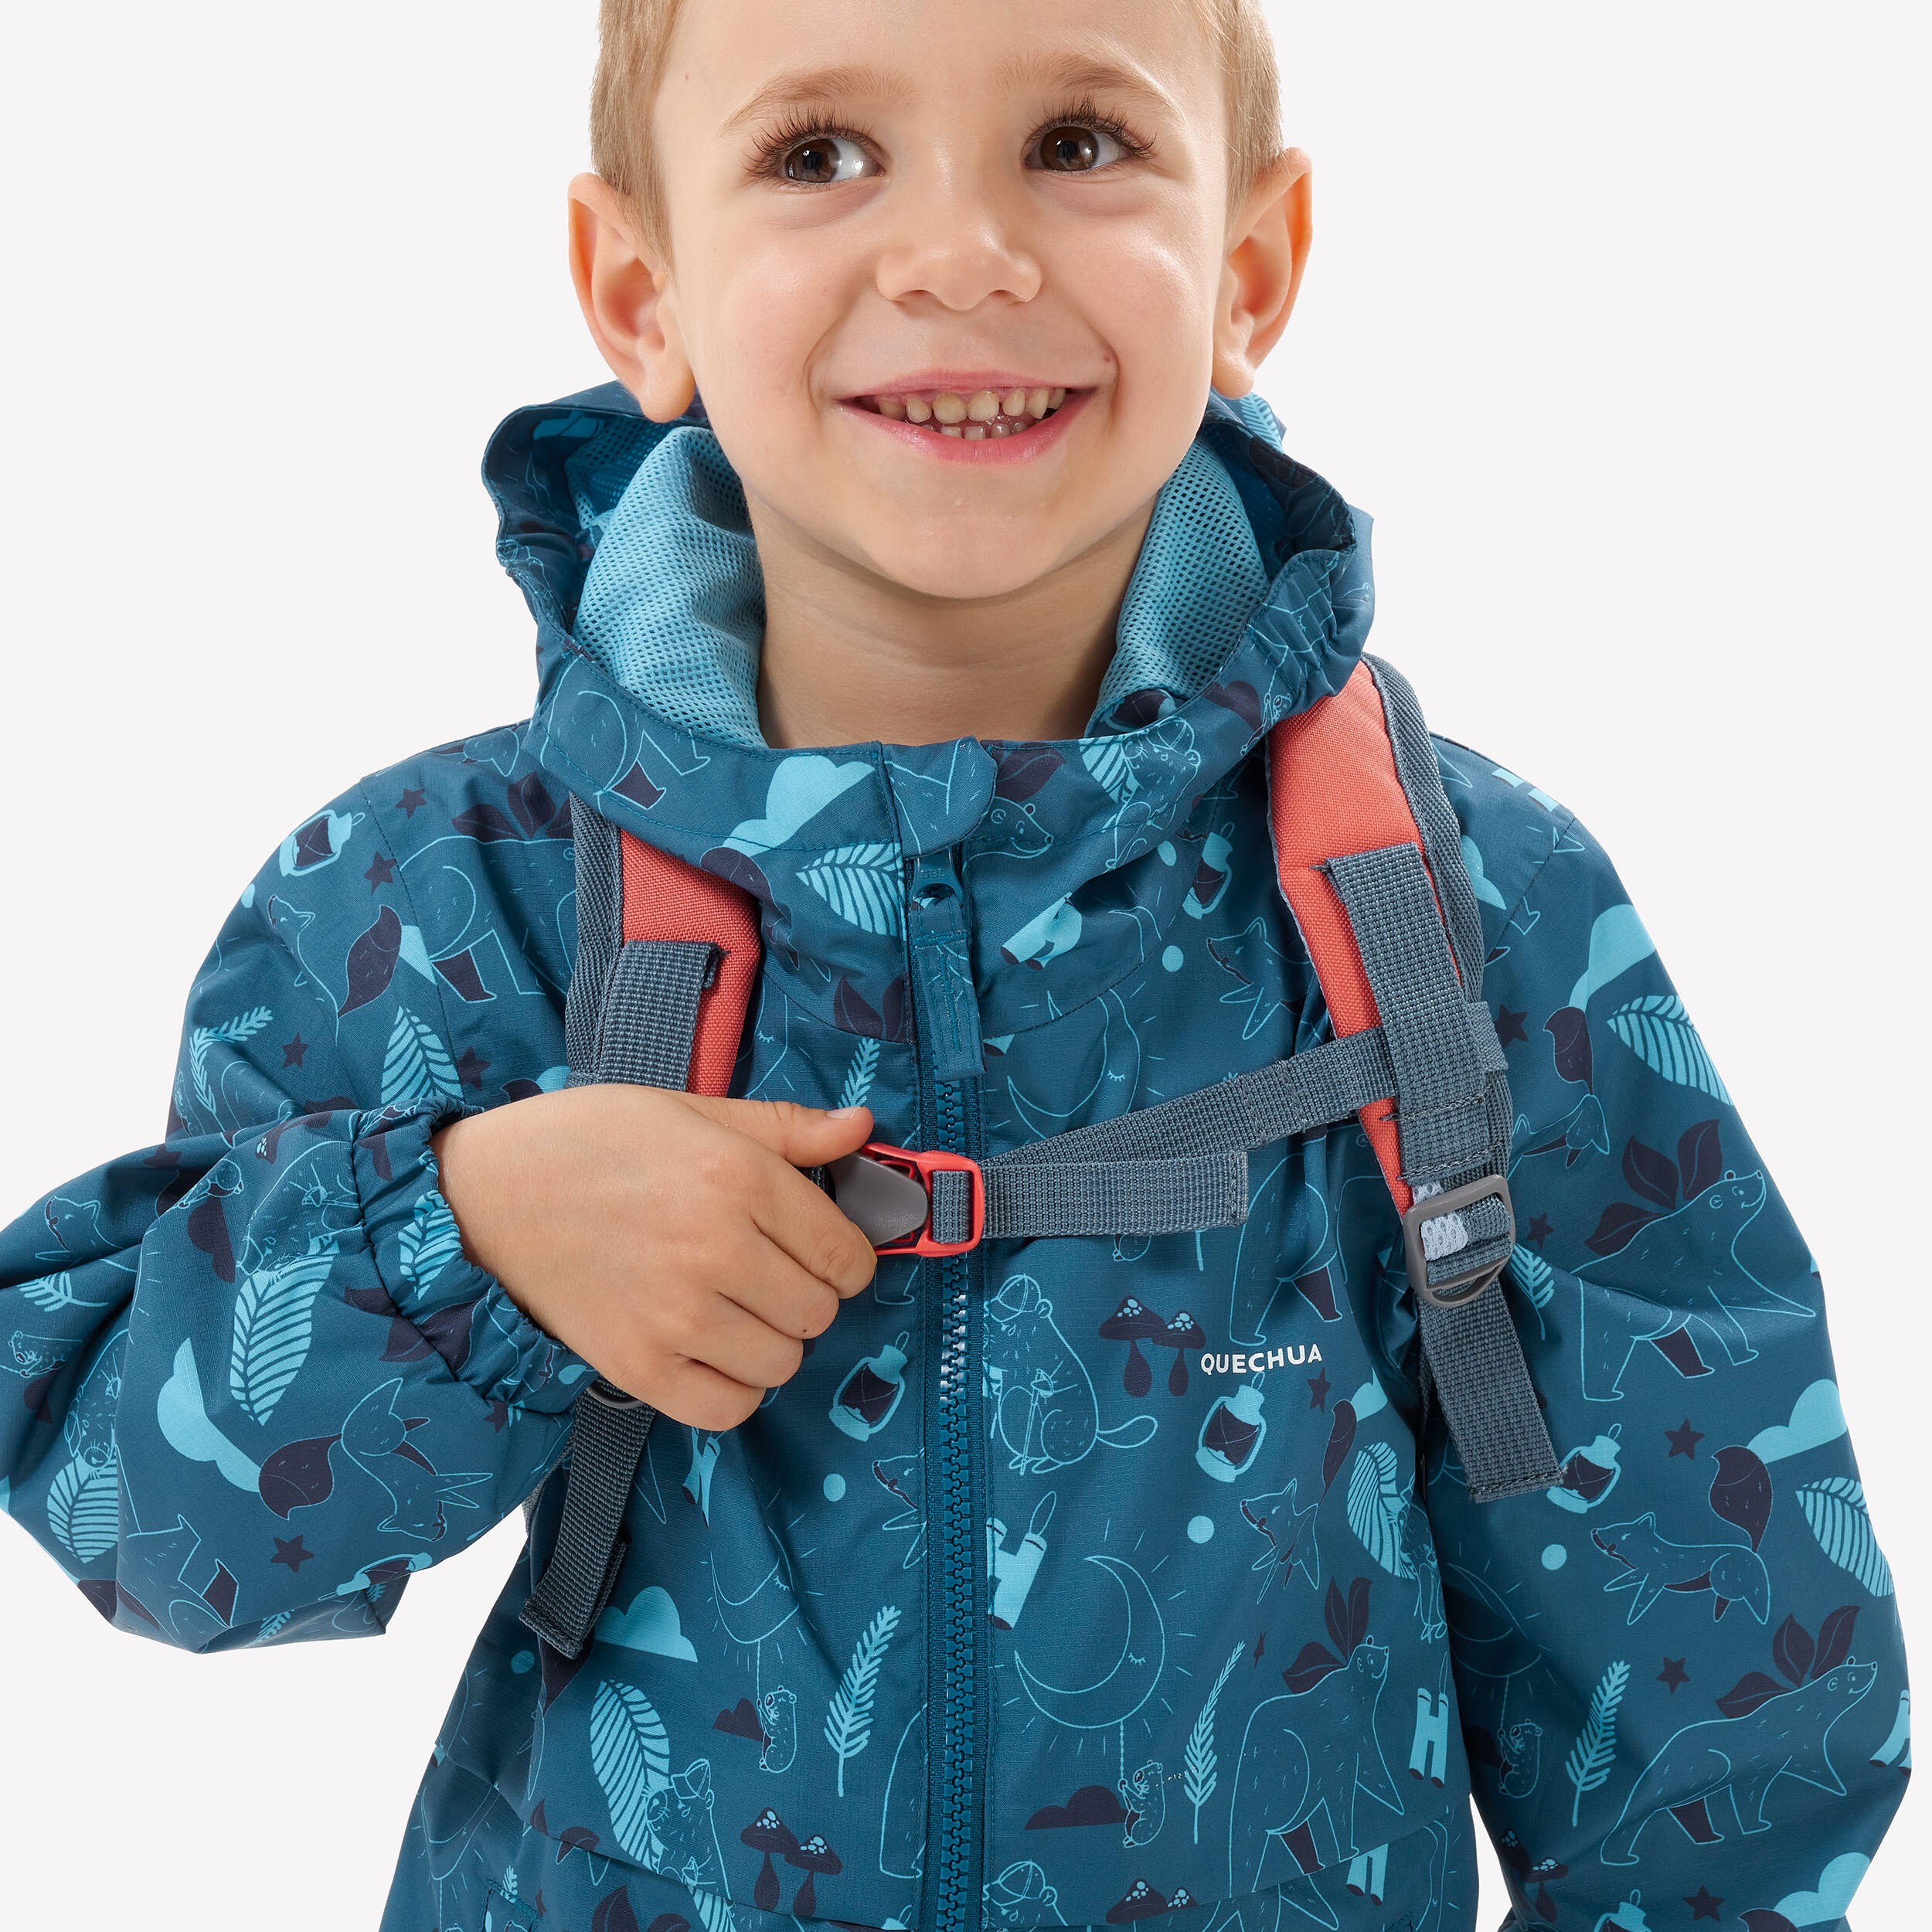 Kids' hiking small backpack 5L - MH100 7/8